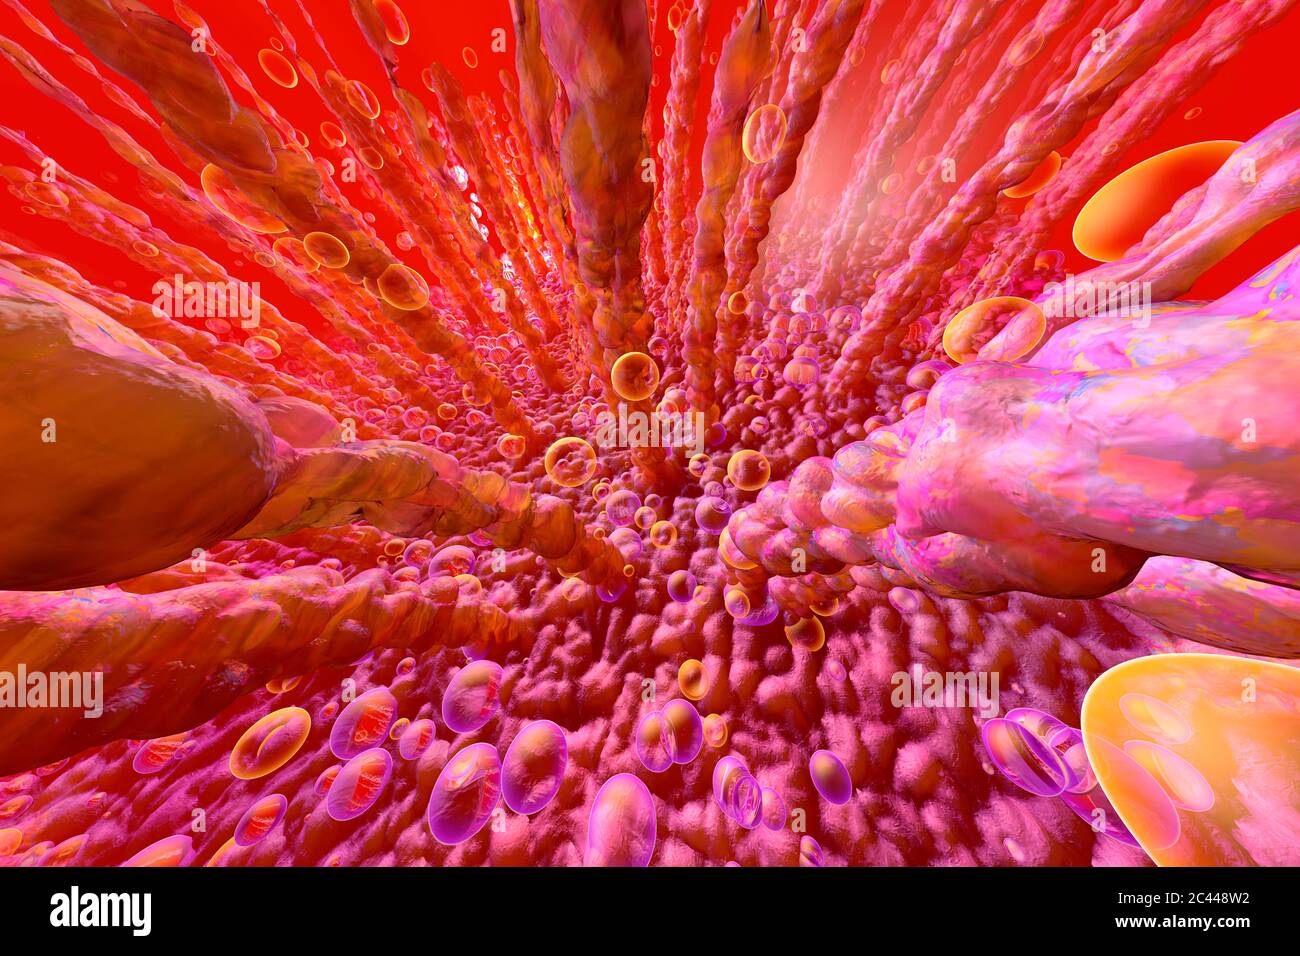 3D rendered illustration, visualization of human intestinal villi and metabolism on microscopic level Stock Photo